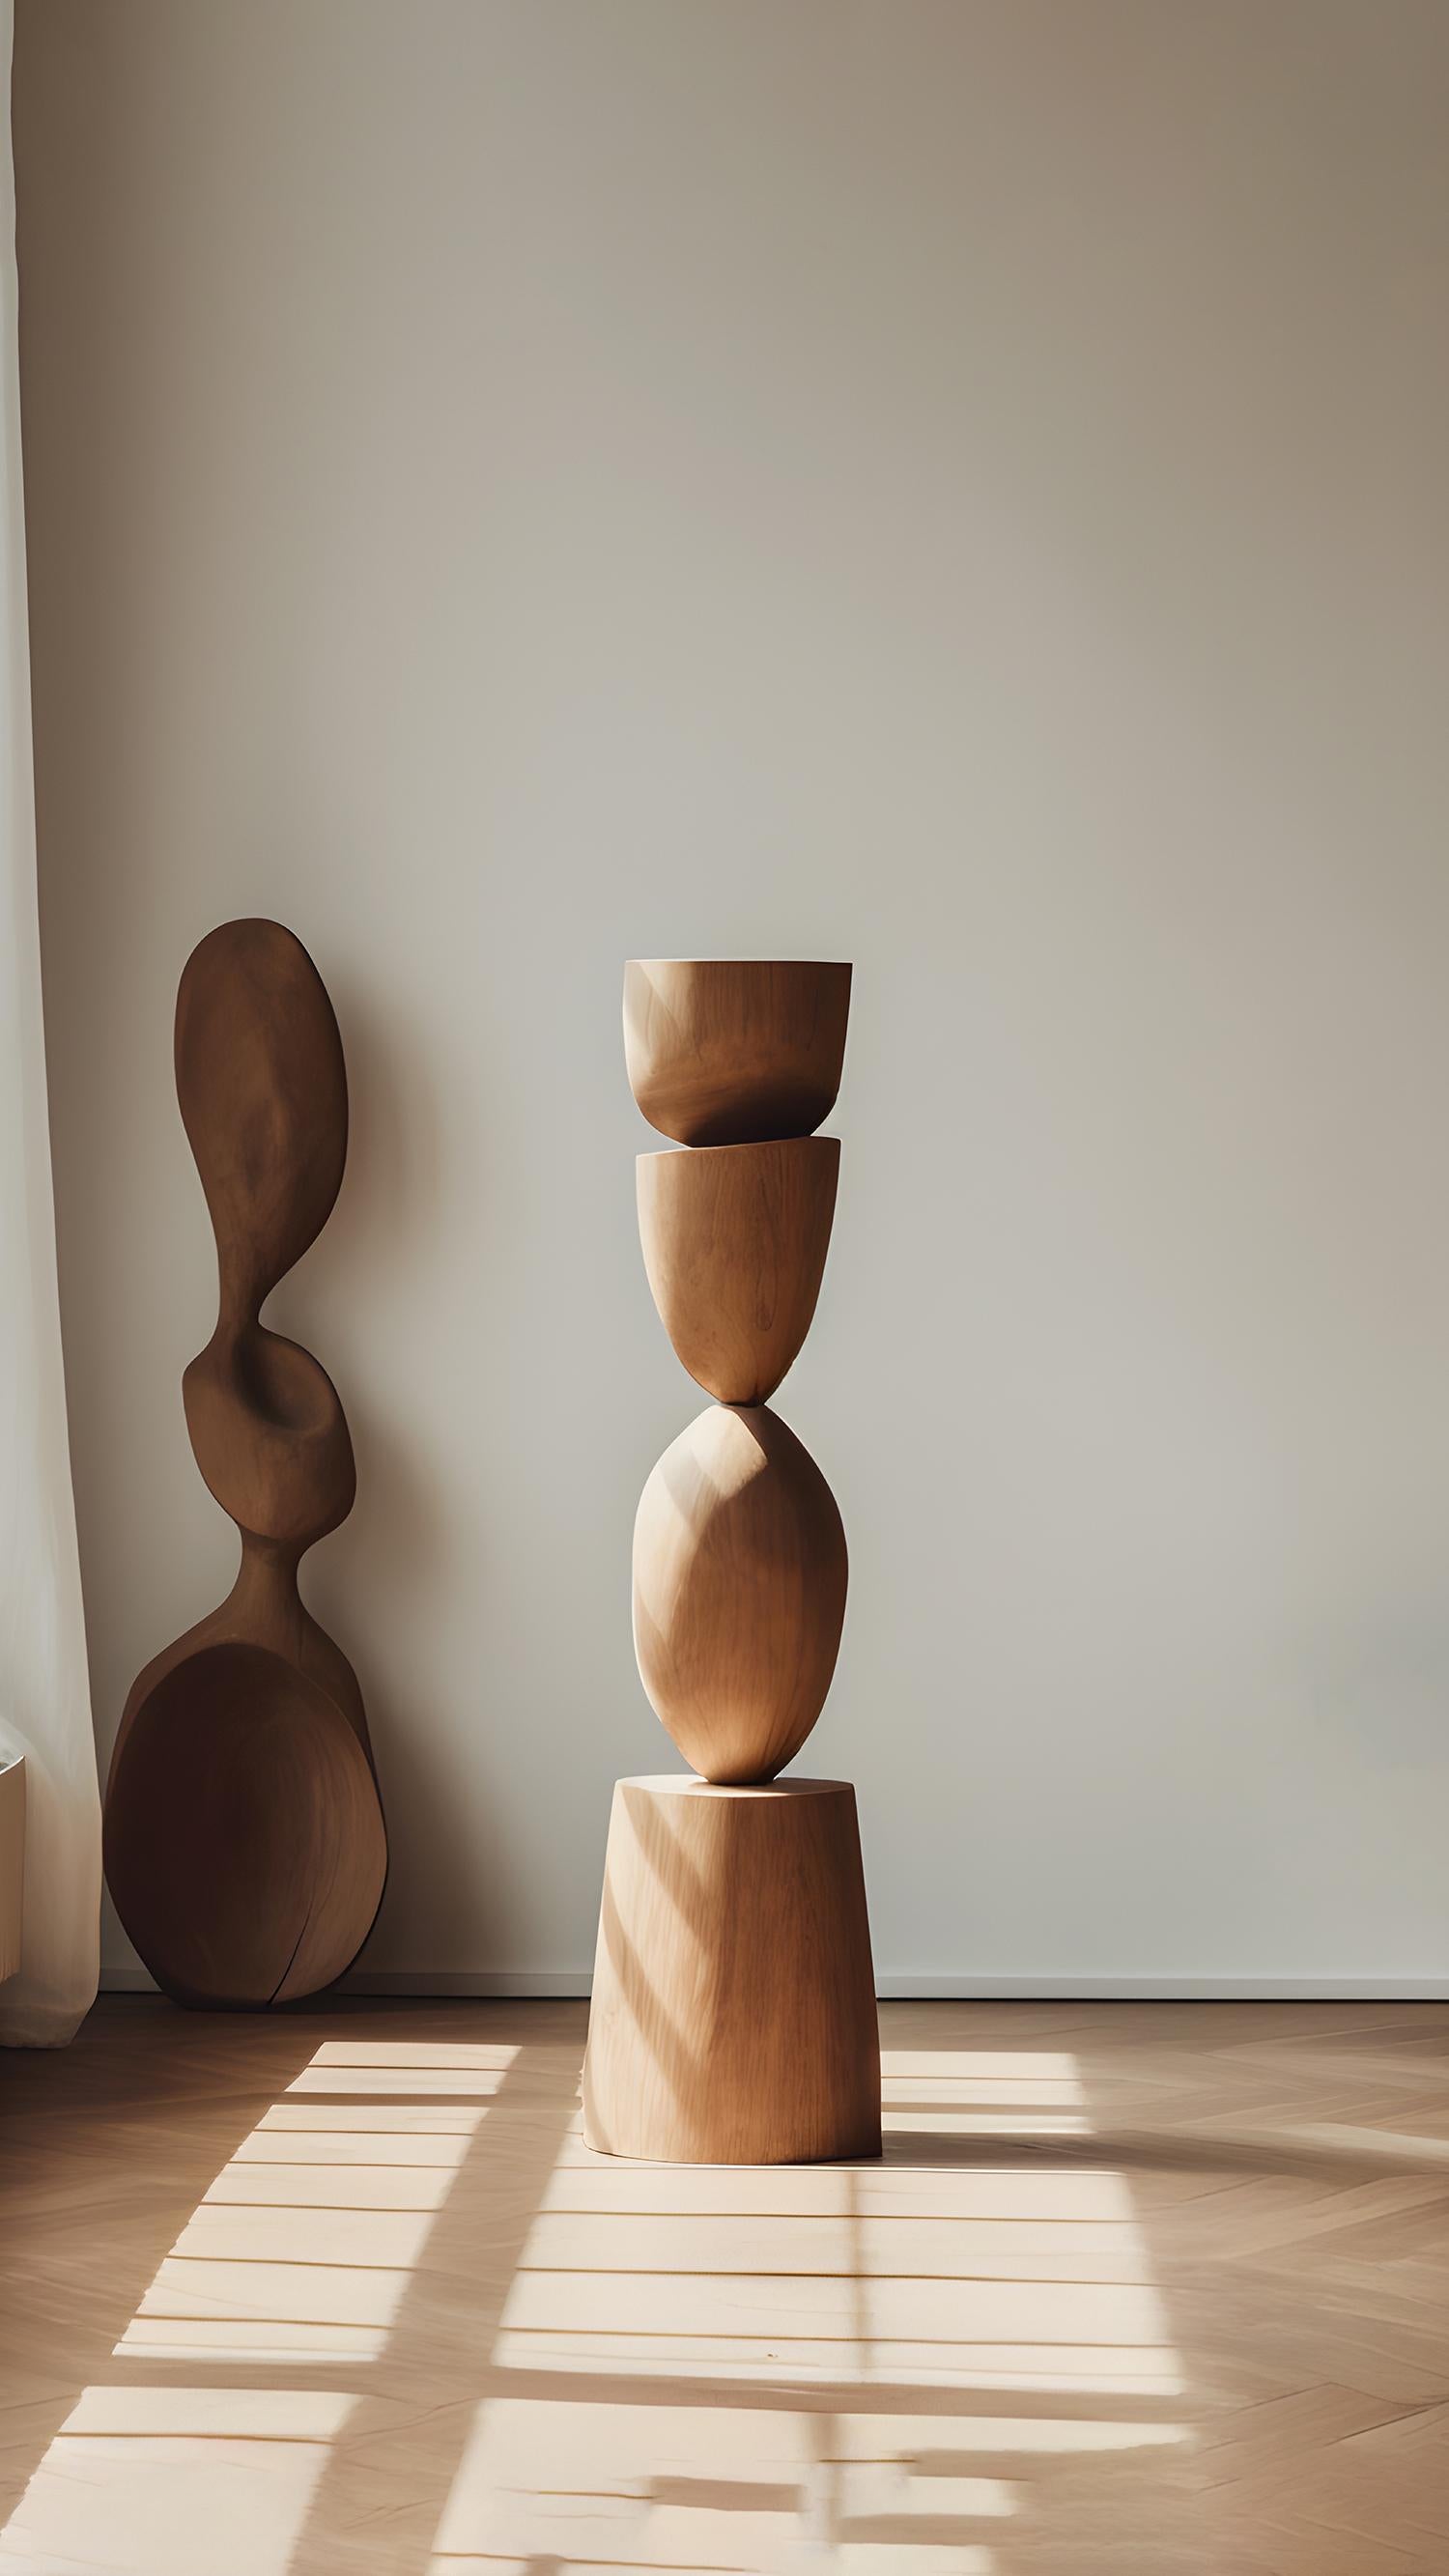 Mexican Still Stand No18: Artistic Tranquility in Tall Wood Sculpture by NONO For Sale